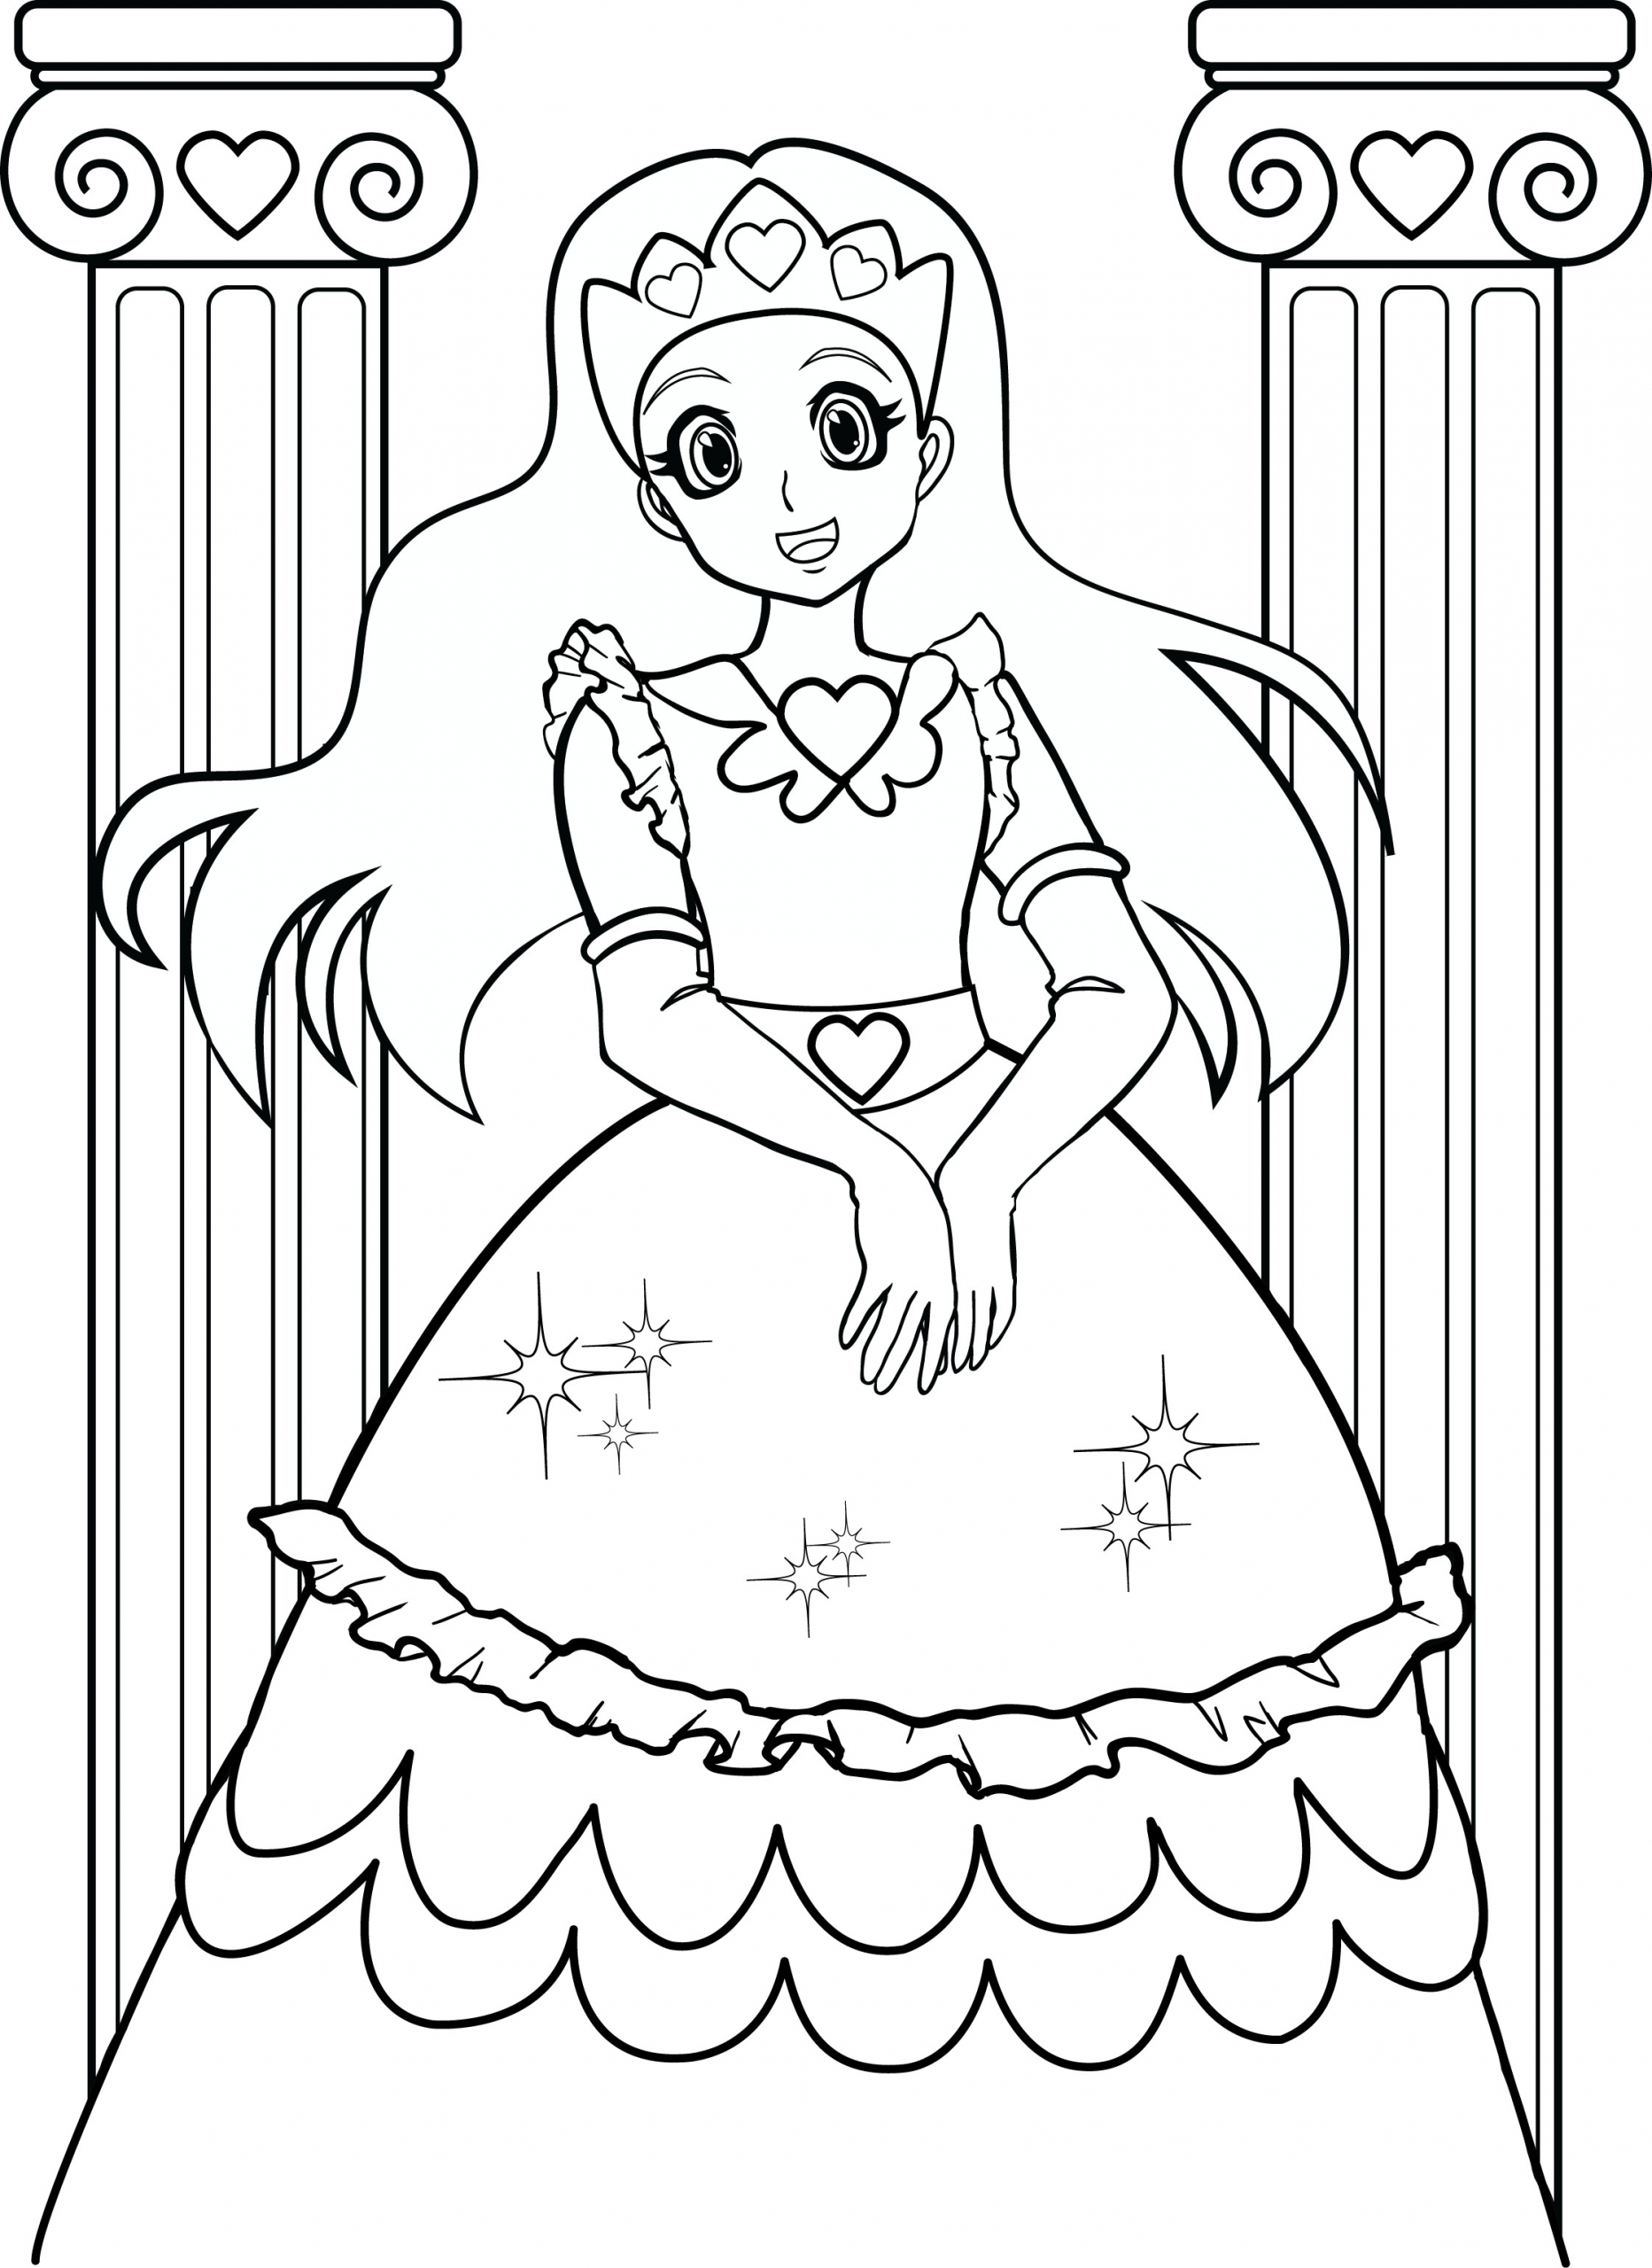 Cool Coloring Pages For Girls
 Coloring Pages for Girls Best Coloring Pages For Kids